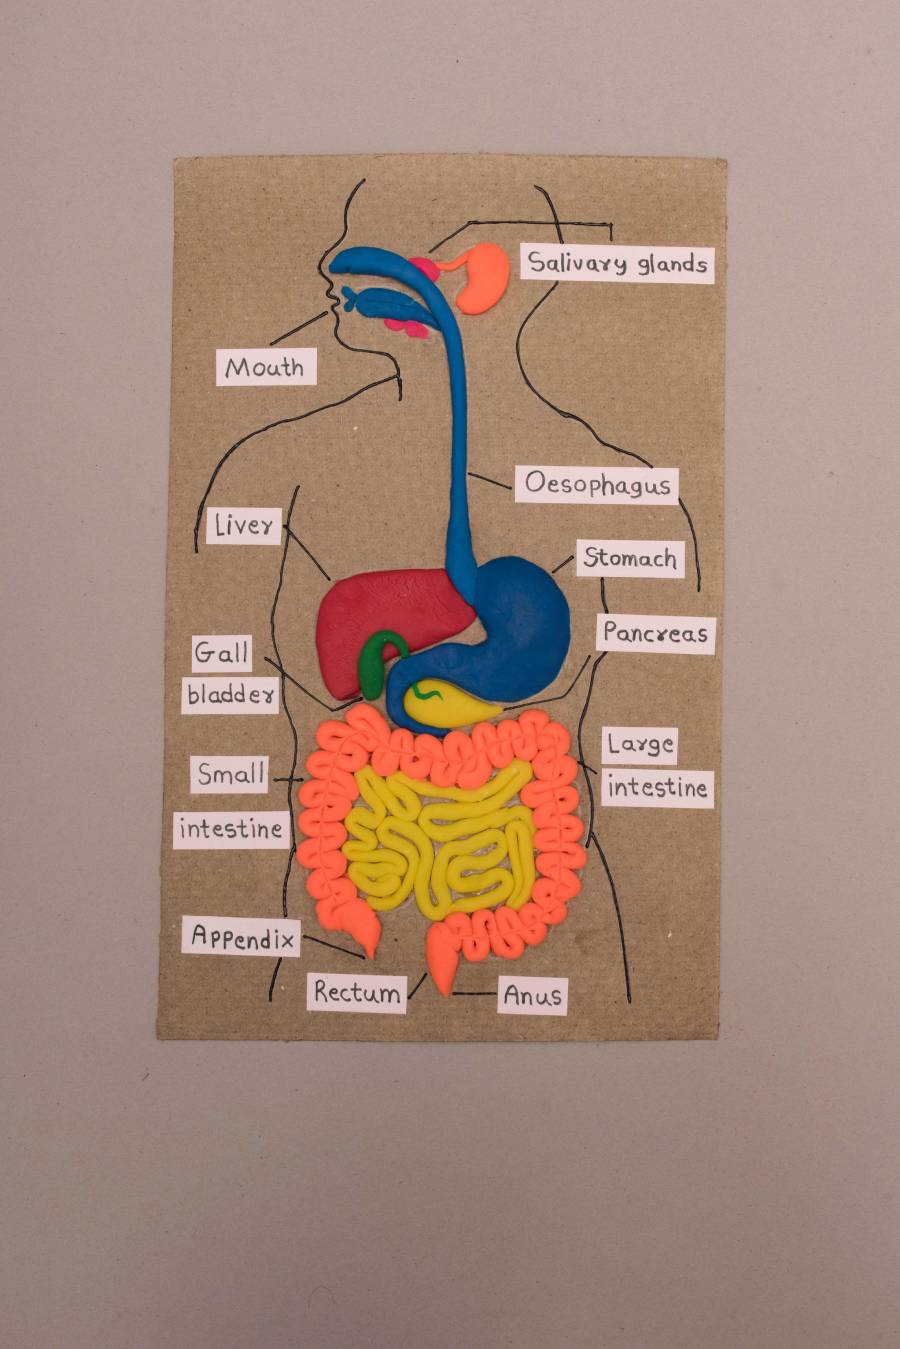 Make a Human Digestive System Clay Model to Understand the Different Body Parts of Organs